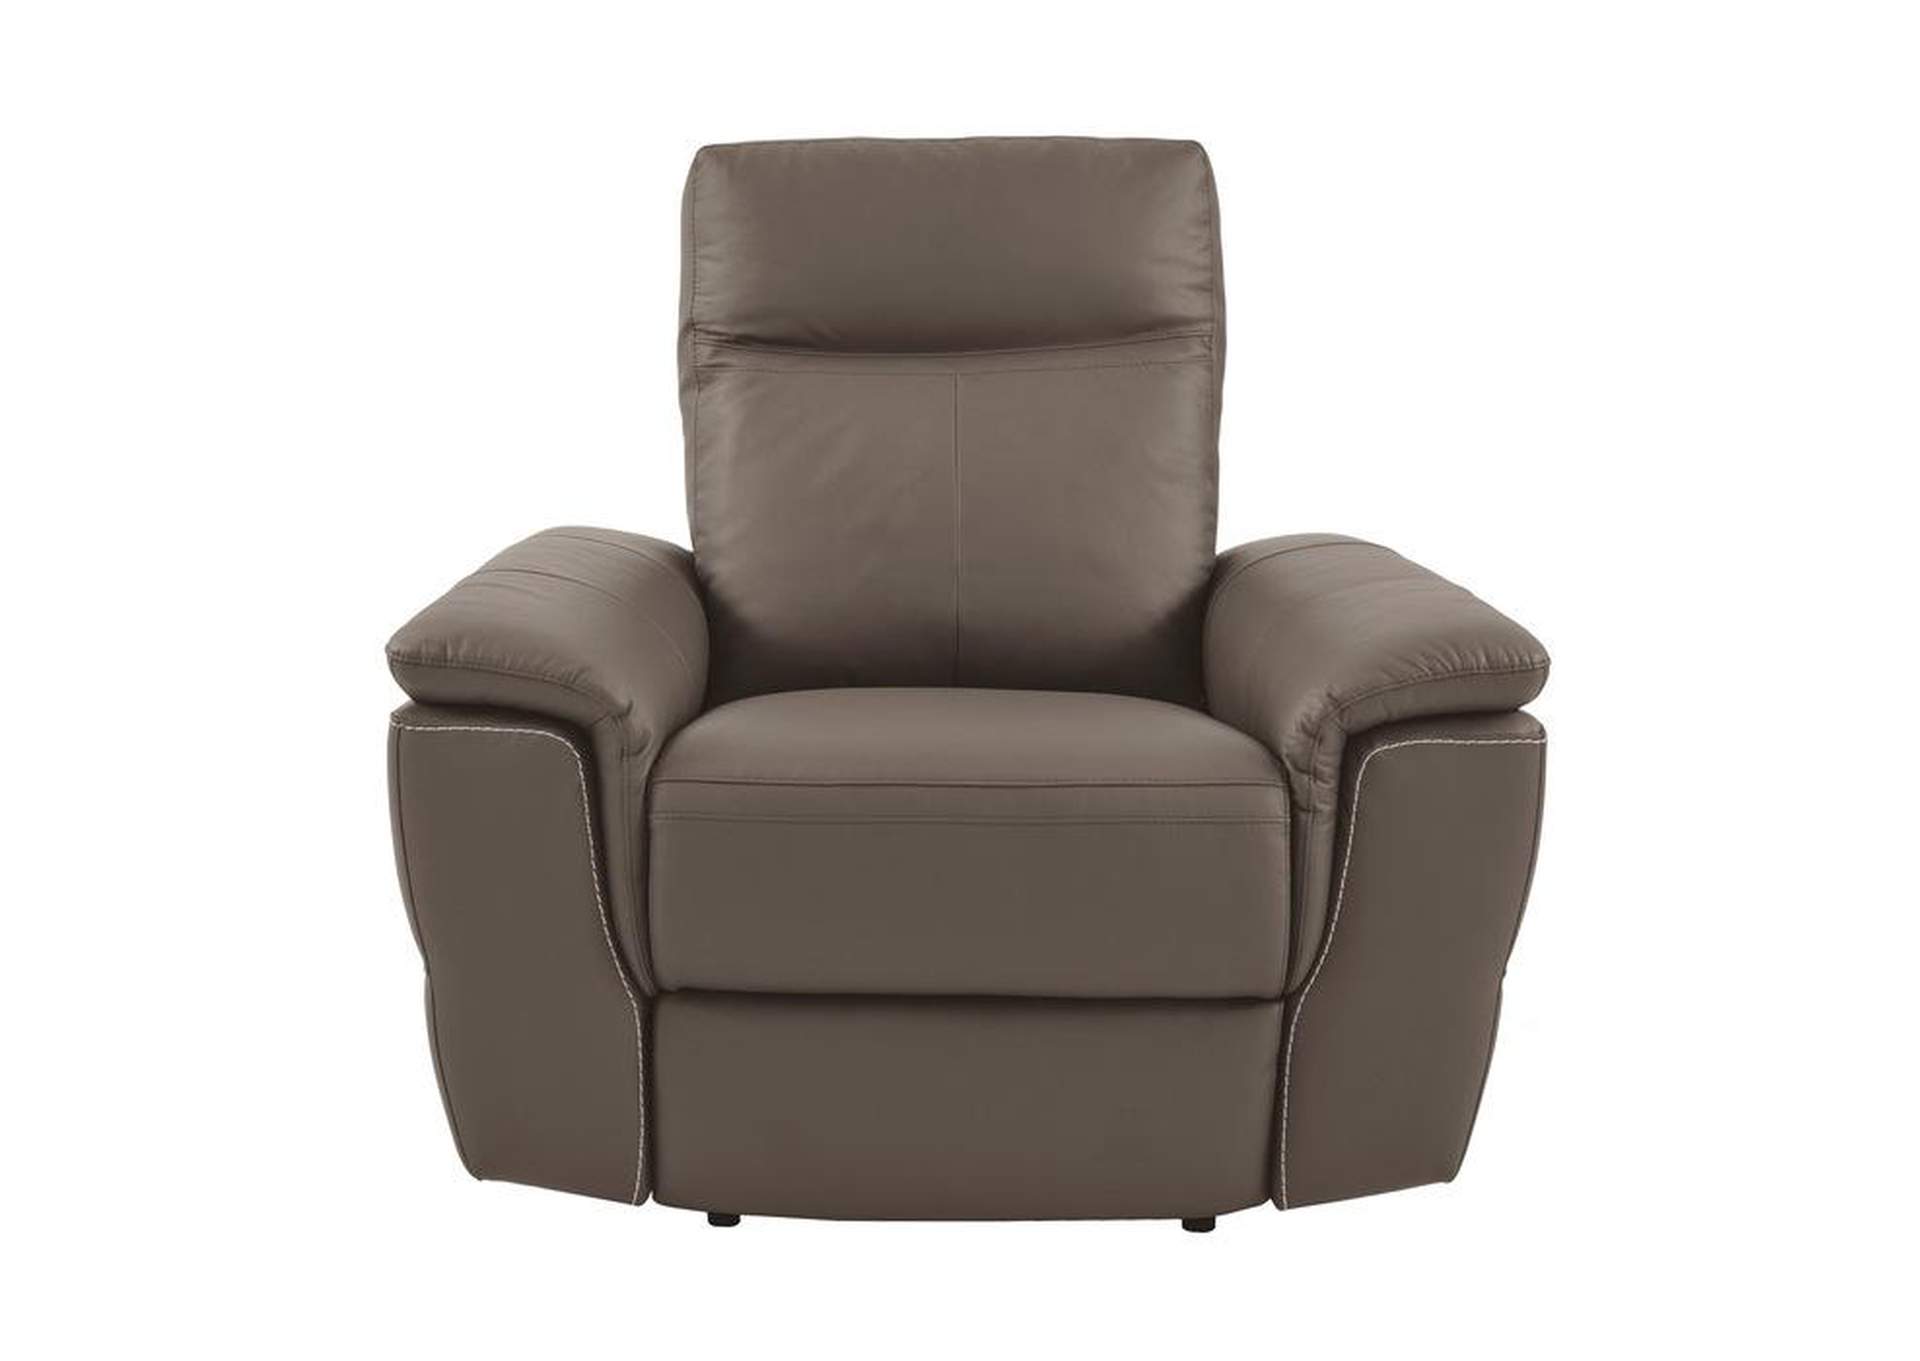 Olympia Power Reclining Chair With Usb Port,Homelegance